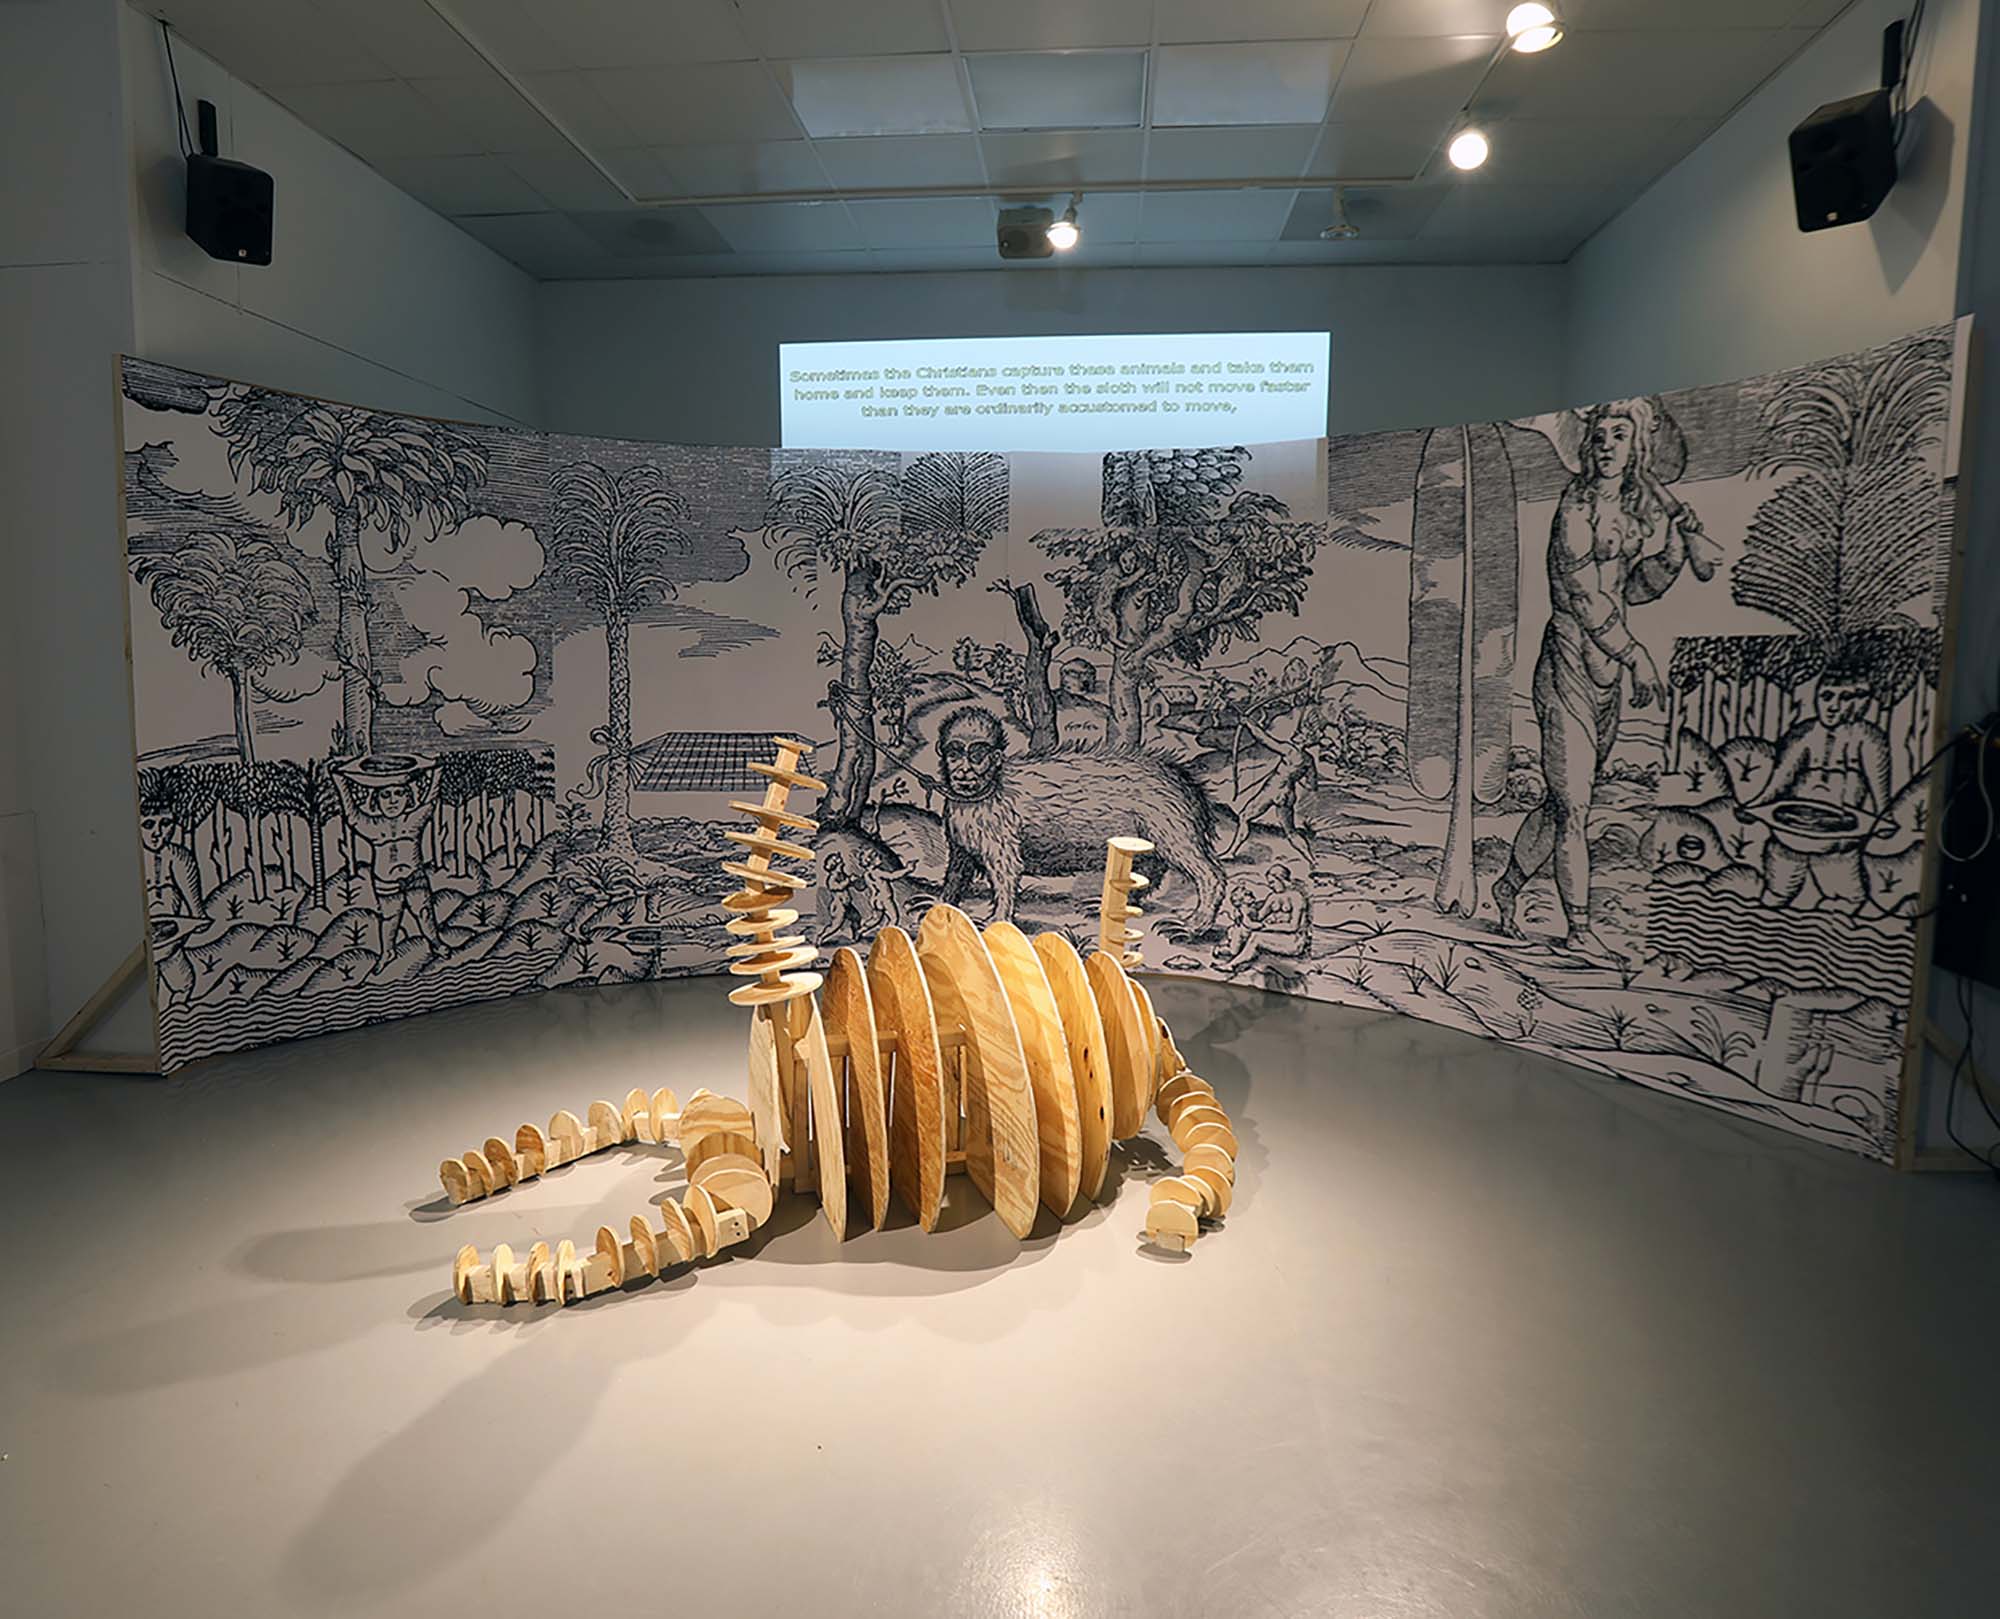 A wooden sculpture made from rows of cut partial circles on a gallery floor with a large illustration behind